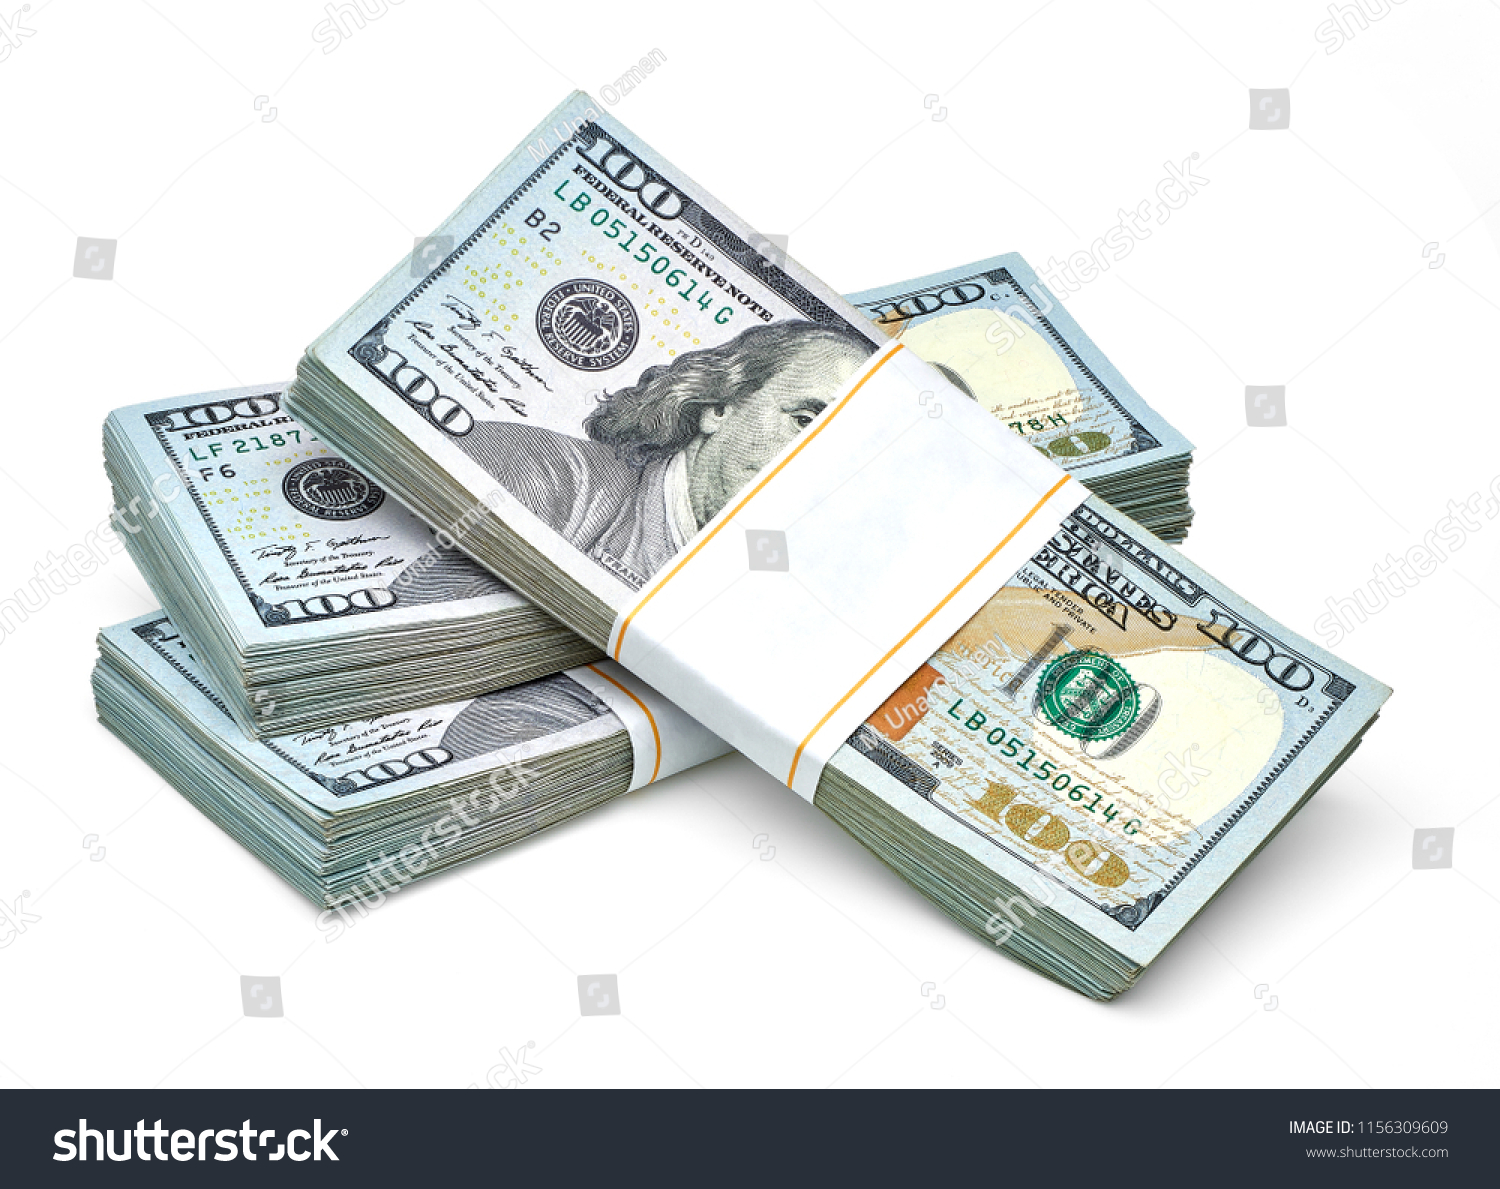 New design US Dollar bills bundles stack on white background including clipping path. #1156309609